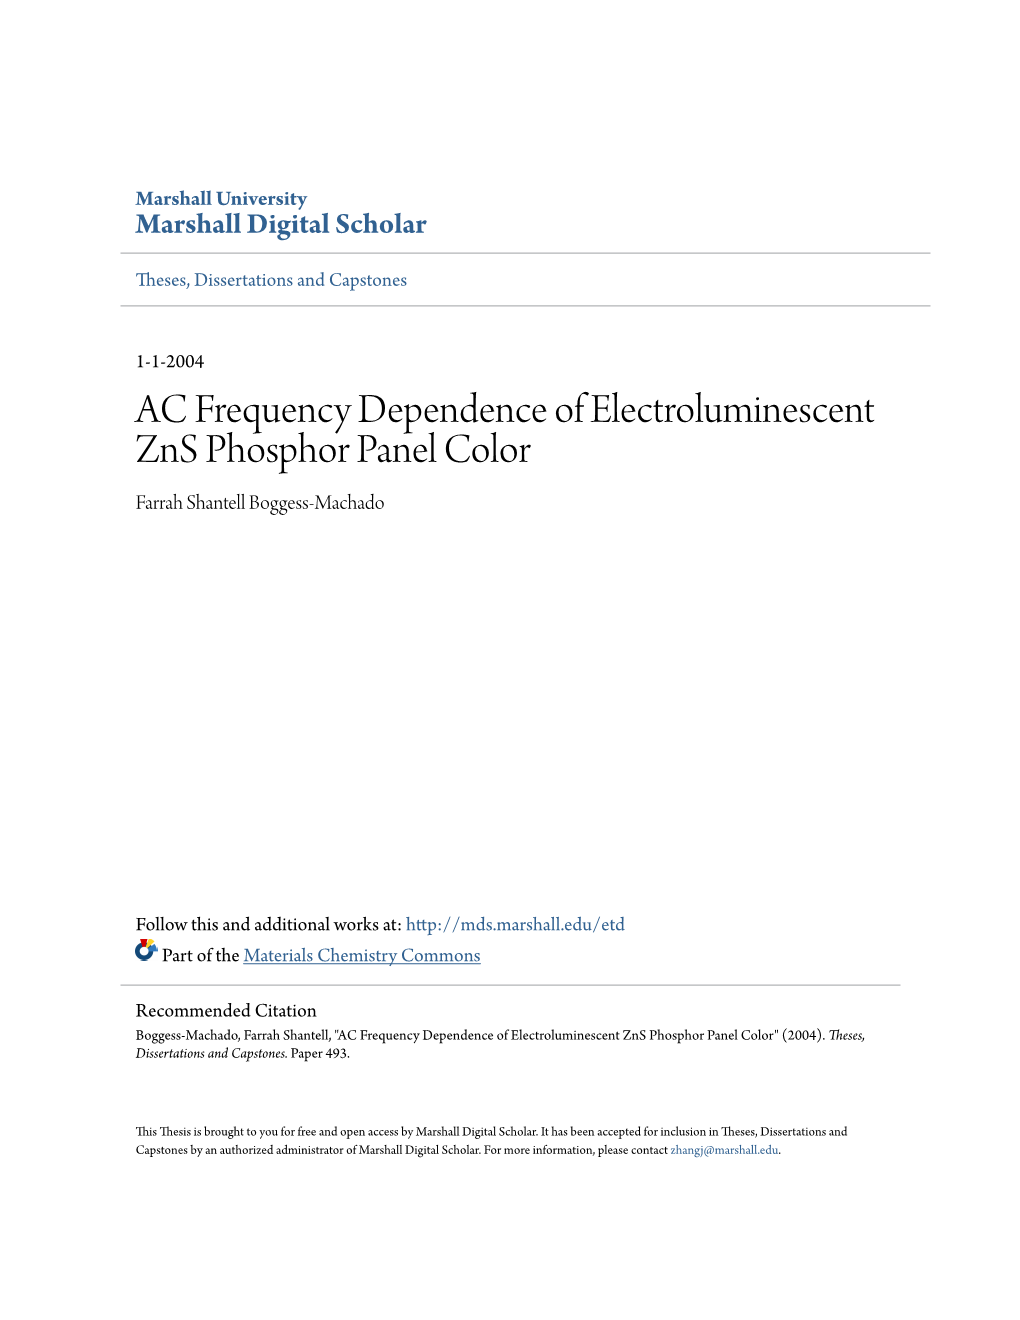 AC Frequency Dependence of Electroluminescent Zns Phosphor Panel Color Farrah Shantell Boggess-Machado